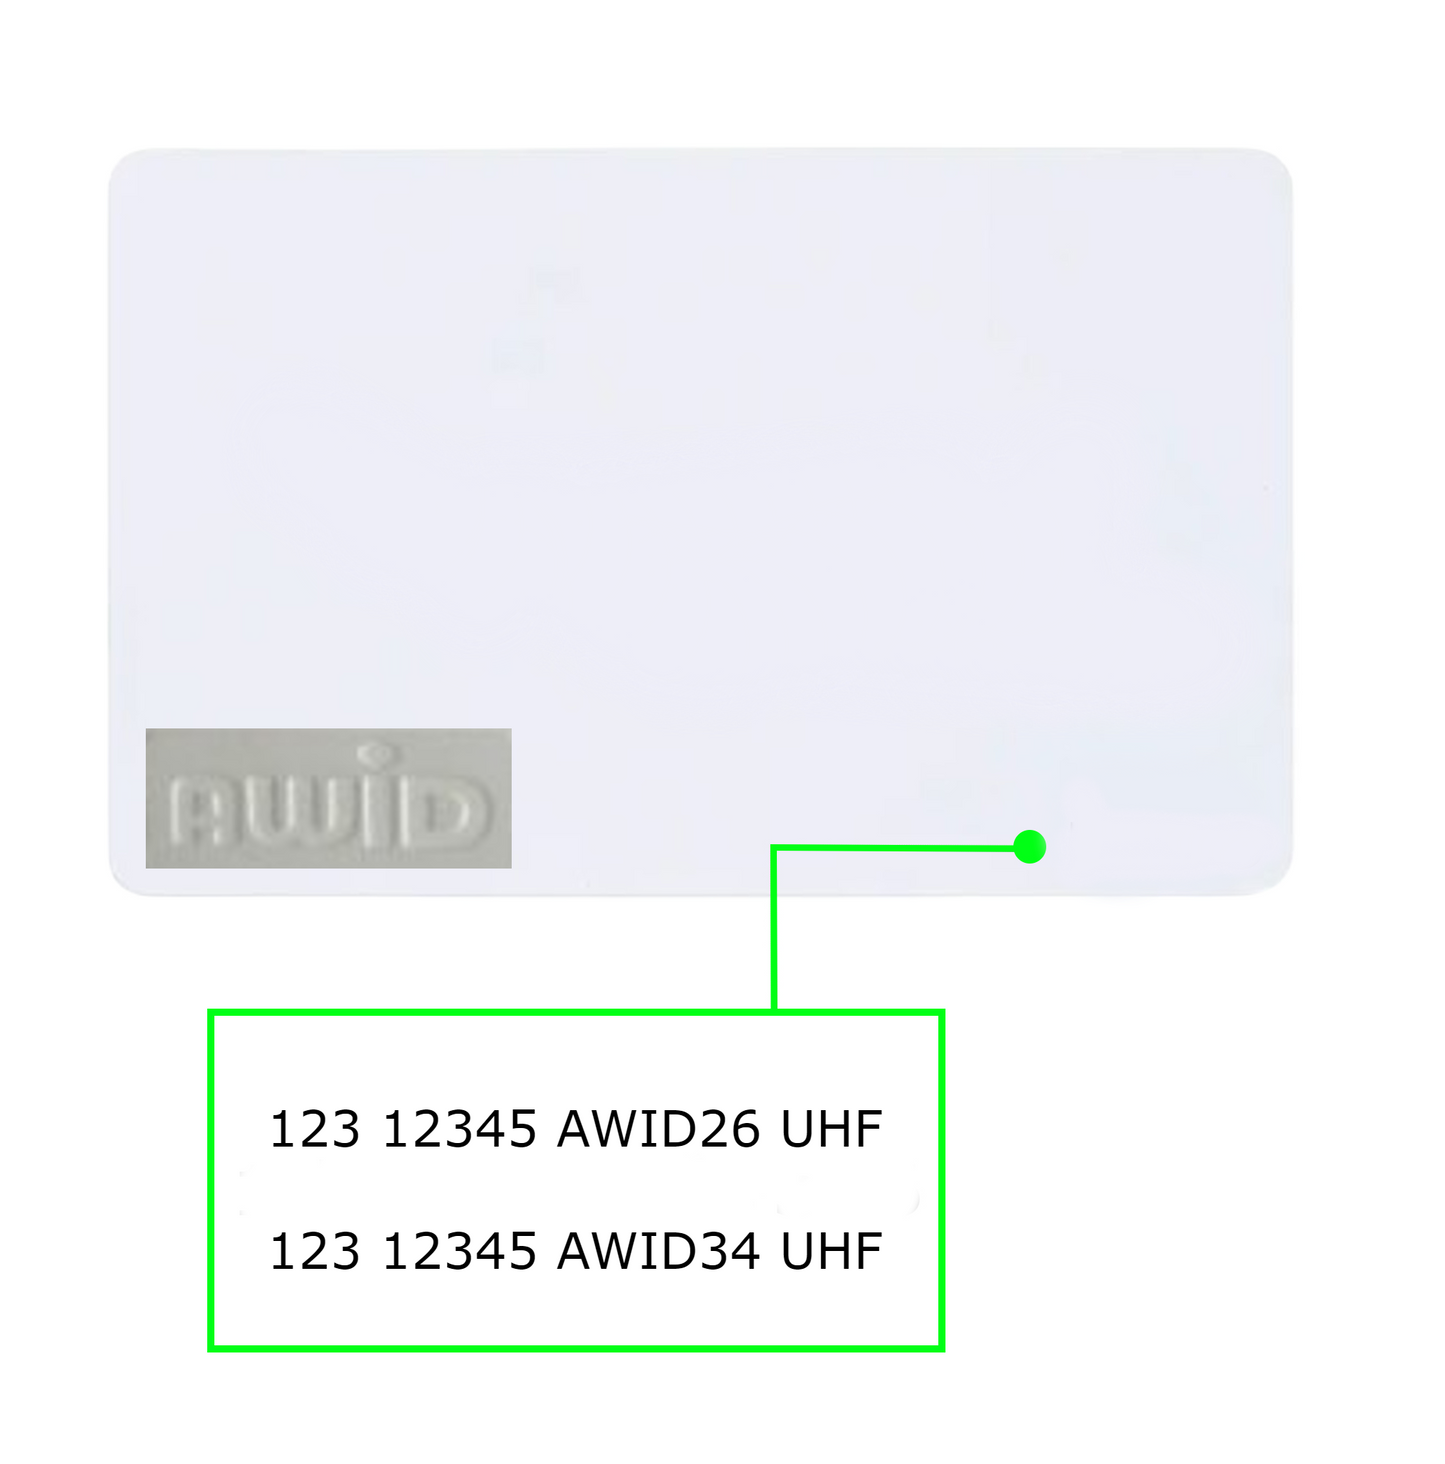 AWID UHF Parking Garage Copy clone apartment card apartment garage access apartment condo keycard key fob card fob serial number copy by serial number only AWID OEM AWID Tag AWID parking tag